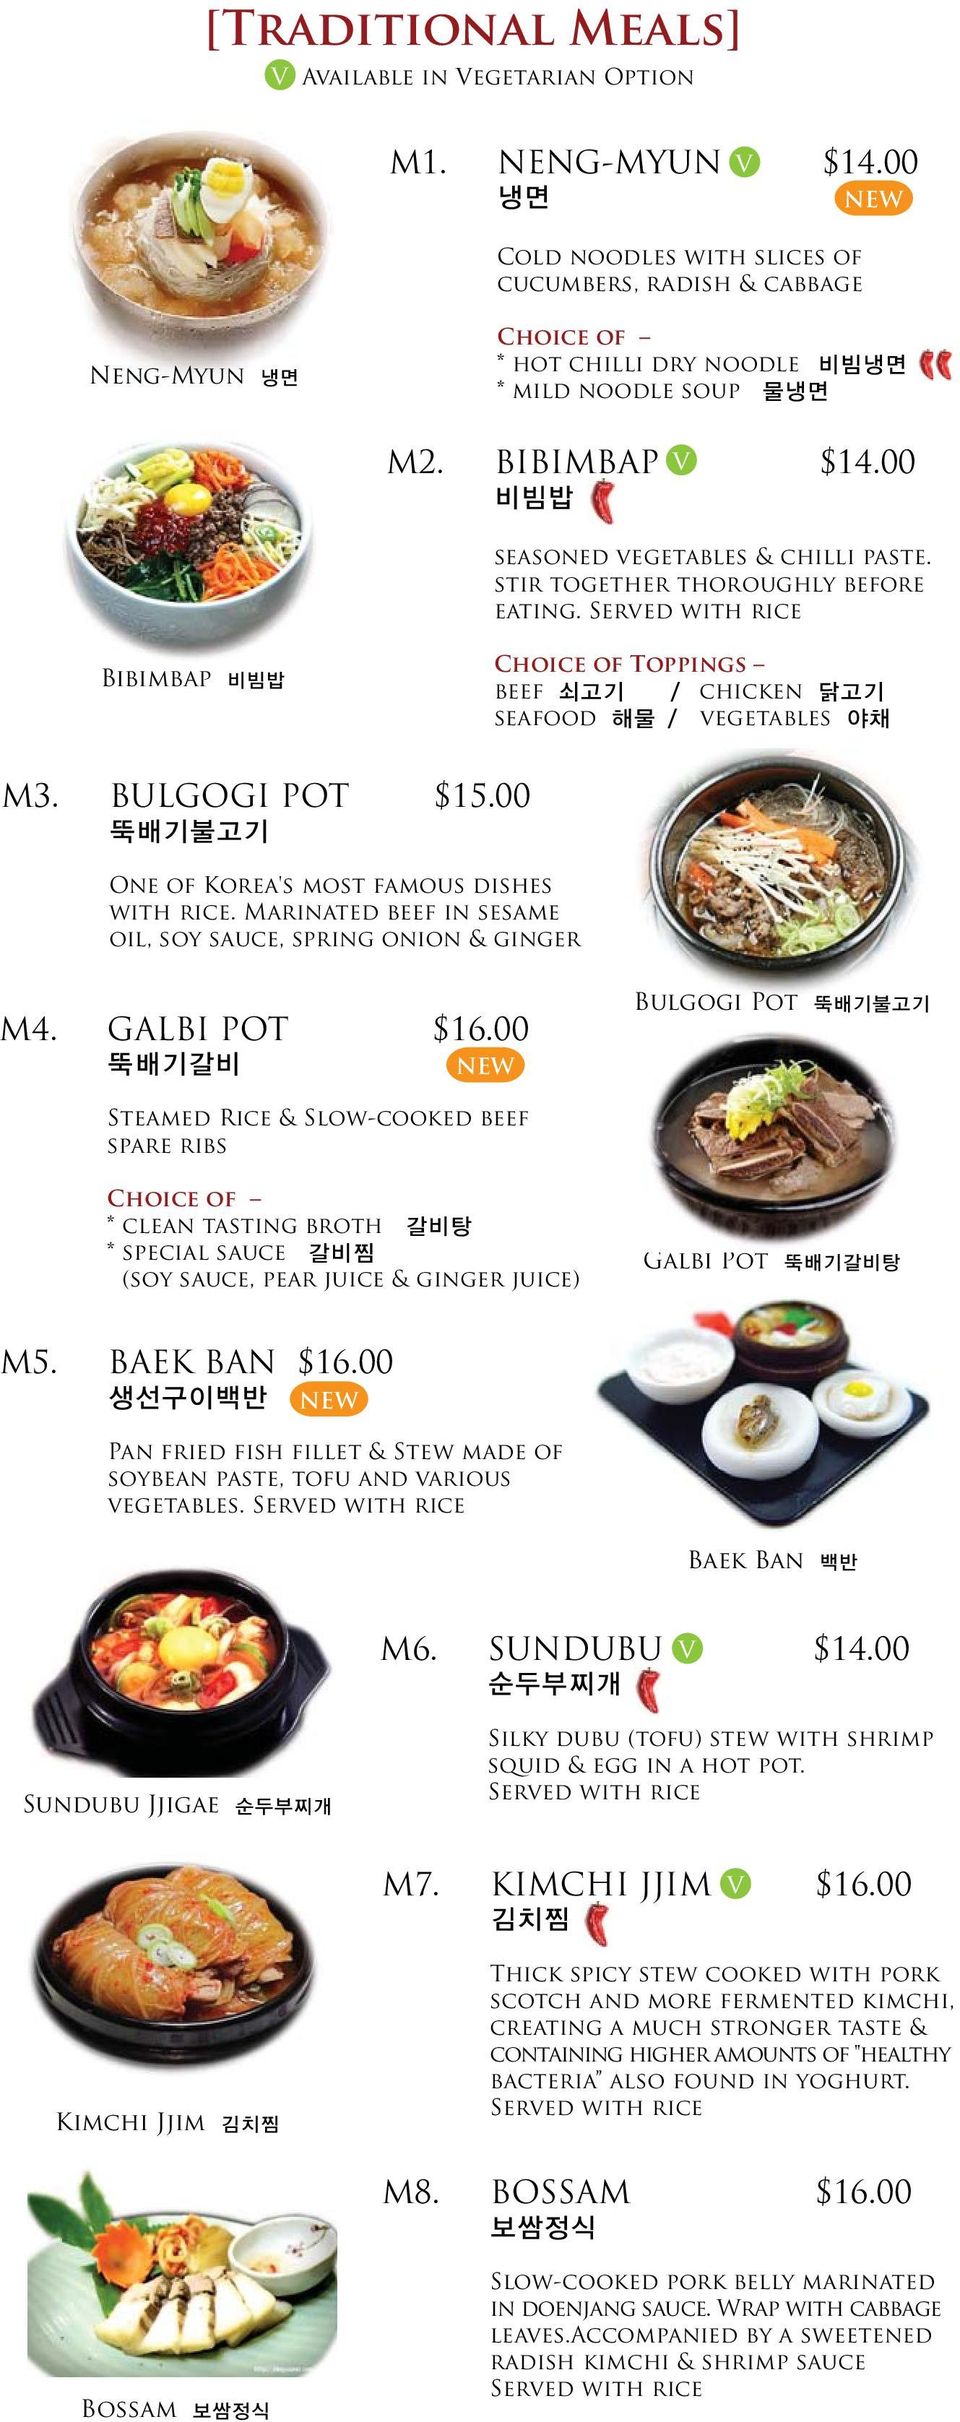 stir together thoroughly before eating. Served with rice Bibimbap 비빔밥 Choice of Toppings beef 쇠고기 / chicken 닭고기 seafood 해물 / vegetables 야채 M3. BULGOGI POT $15.